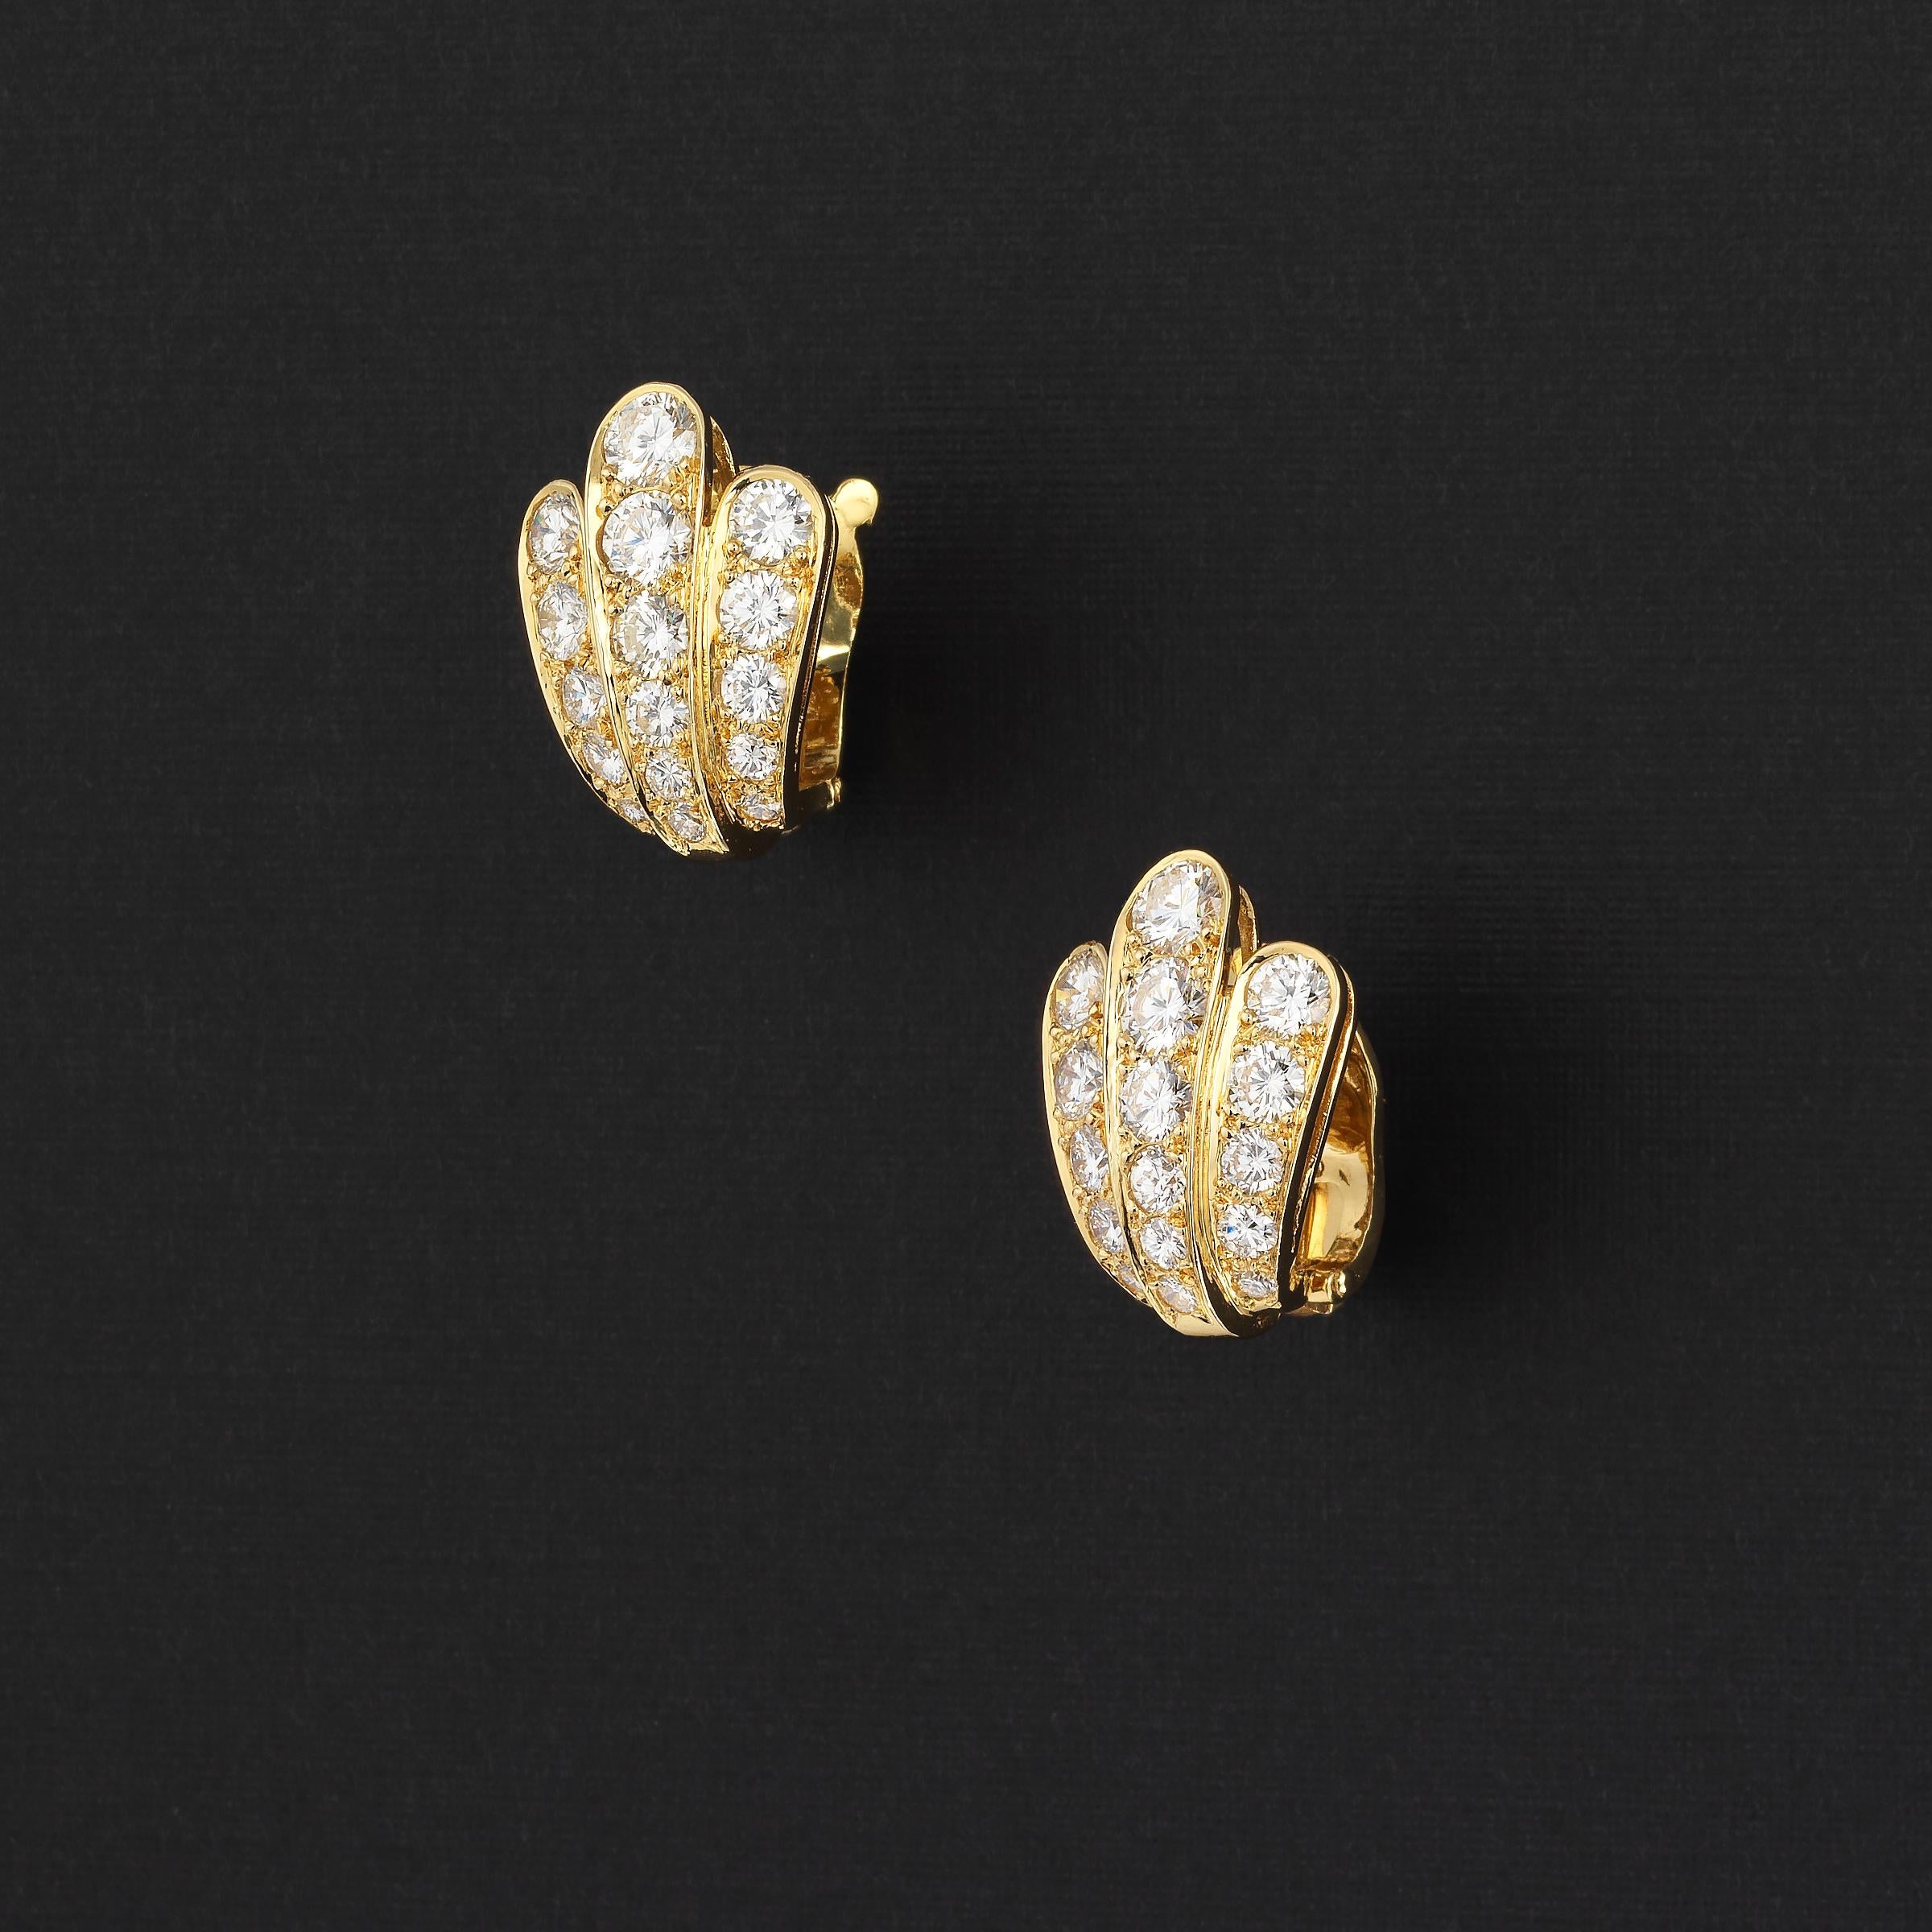 Van Cleef & Arpels dazzling vintage scallop shell-shape earrings showcasing approximately 3 carats of finest white diamonds and set in 18 karat yellow gold. The scallop shape gracefully fans out out from bottom to the top of the earrings and